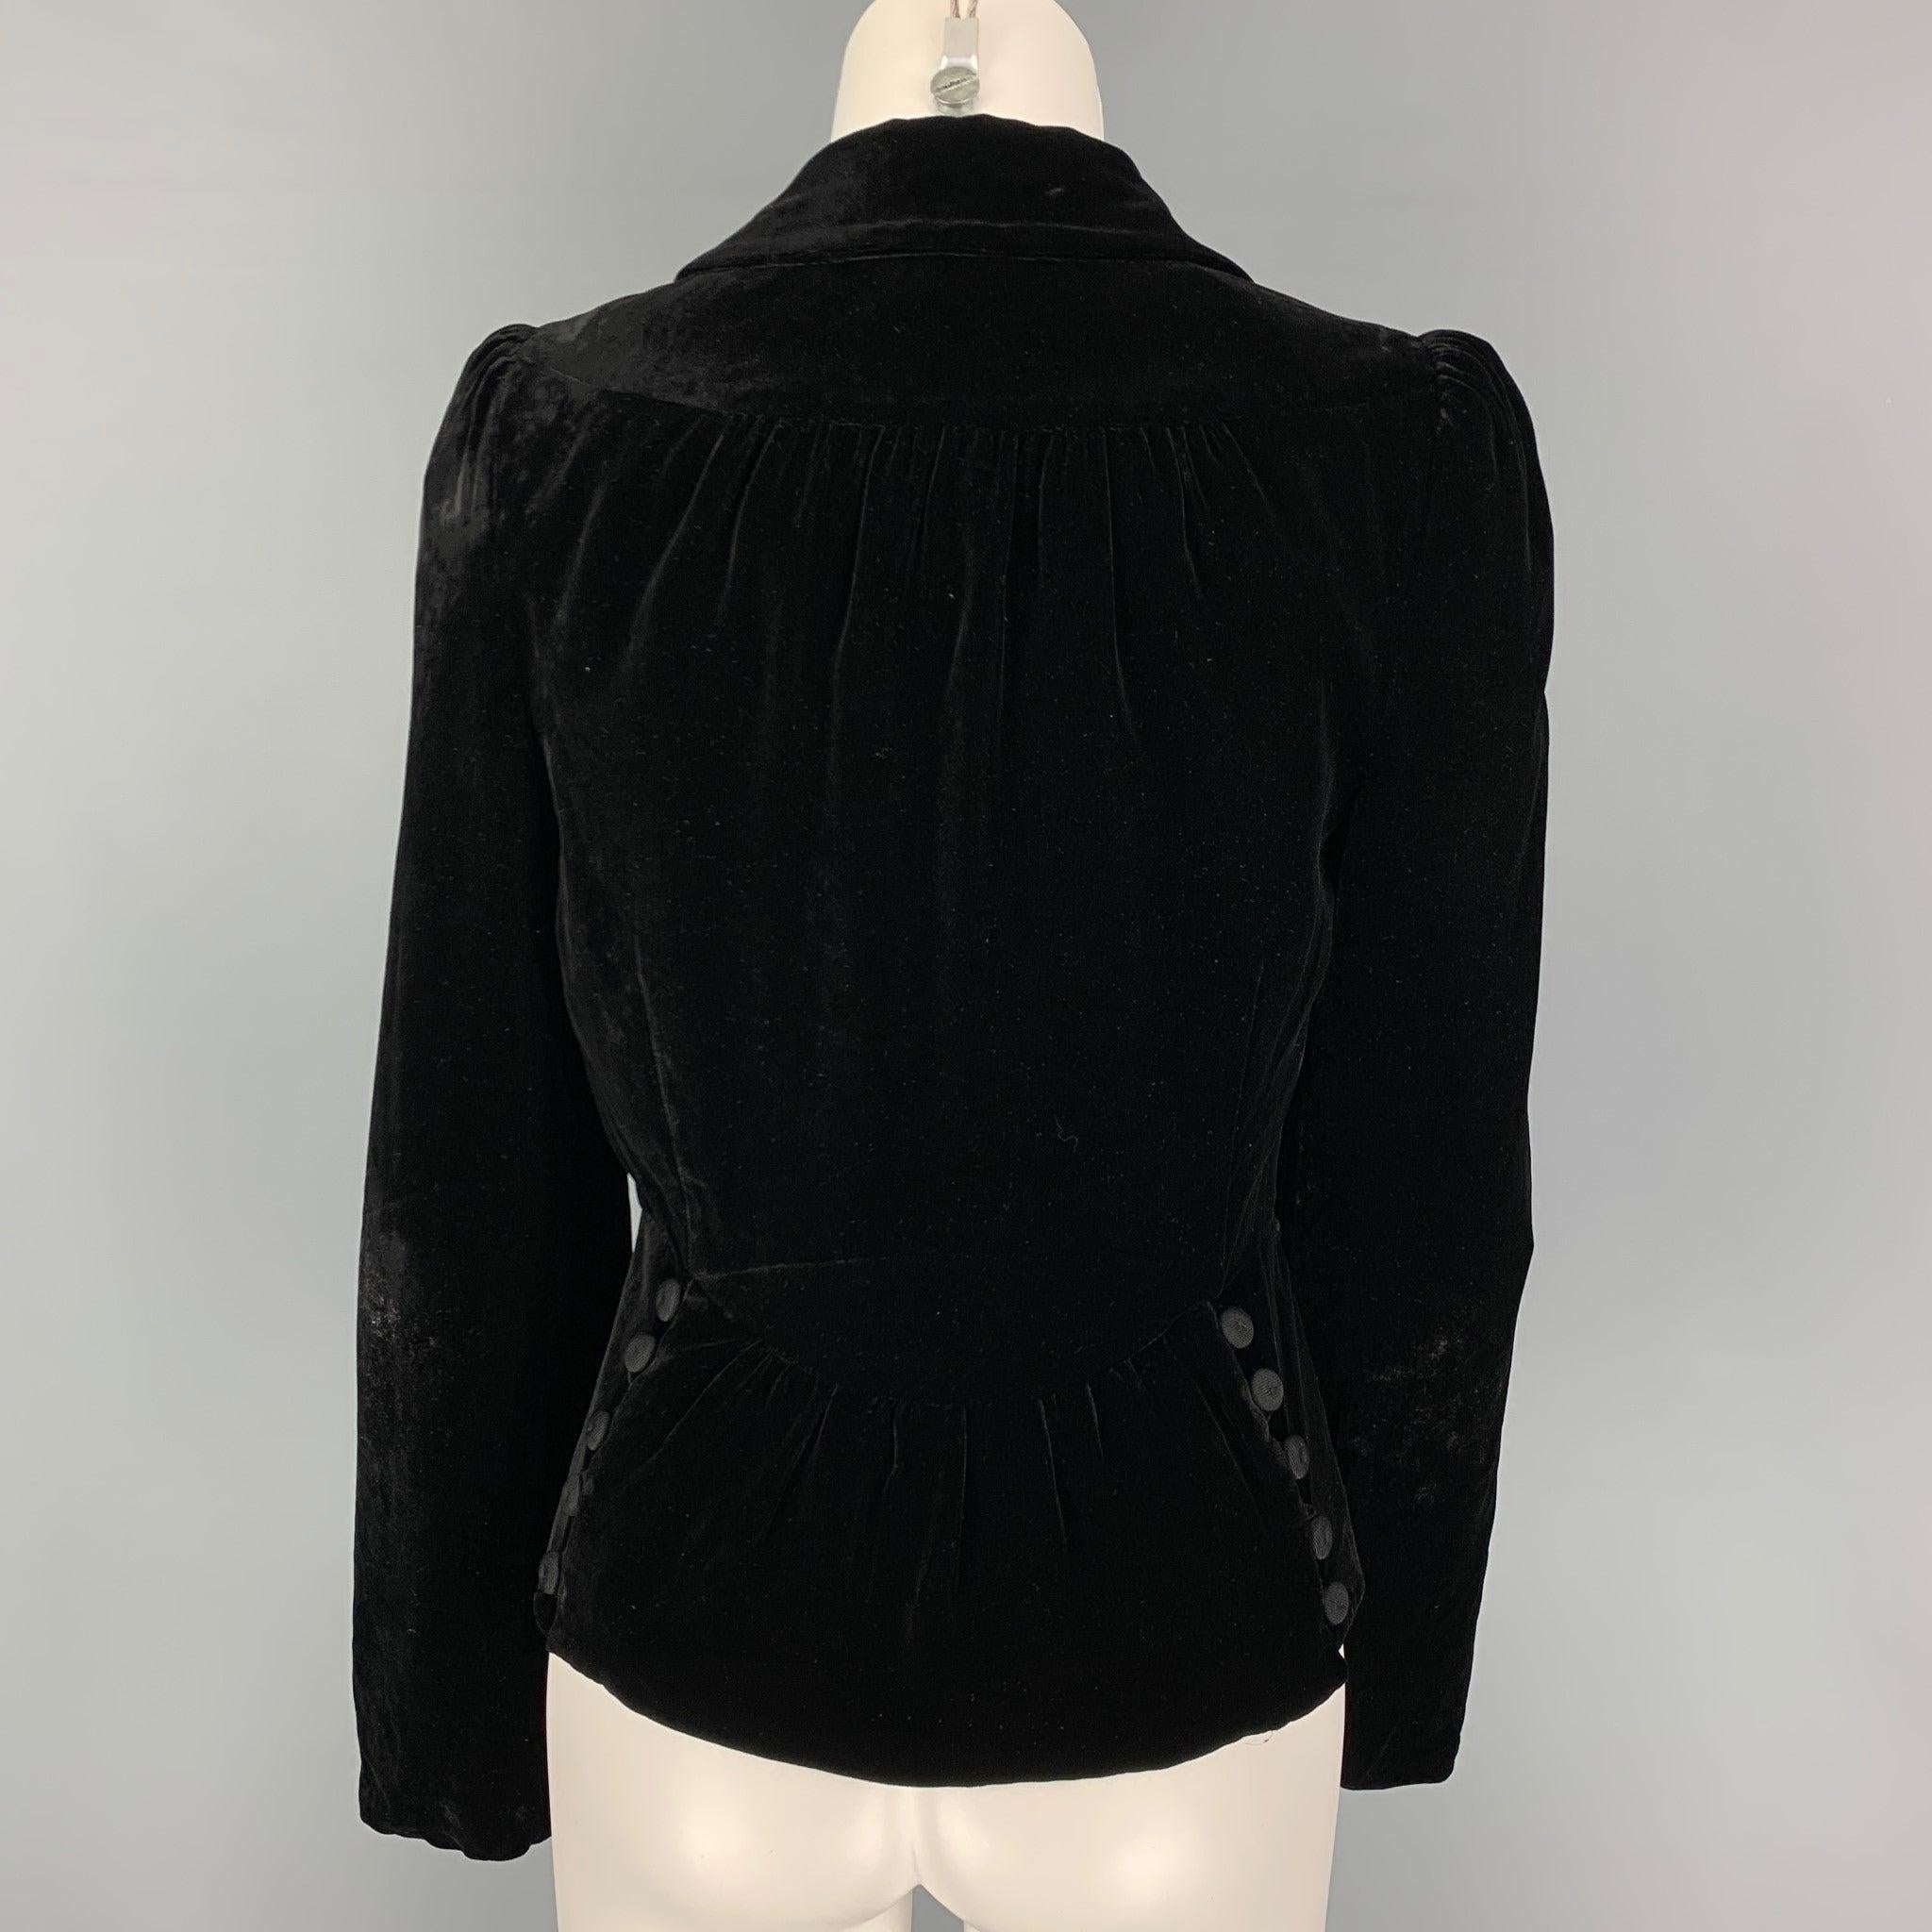 MARC JACOBS Size 2 Black Rayon Blend Velvet Jacket In Good Condition For Sale In San Francisco, CA